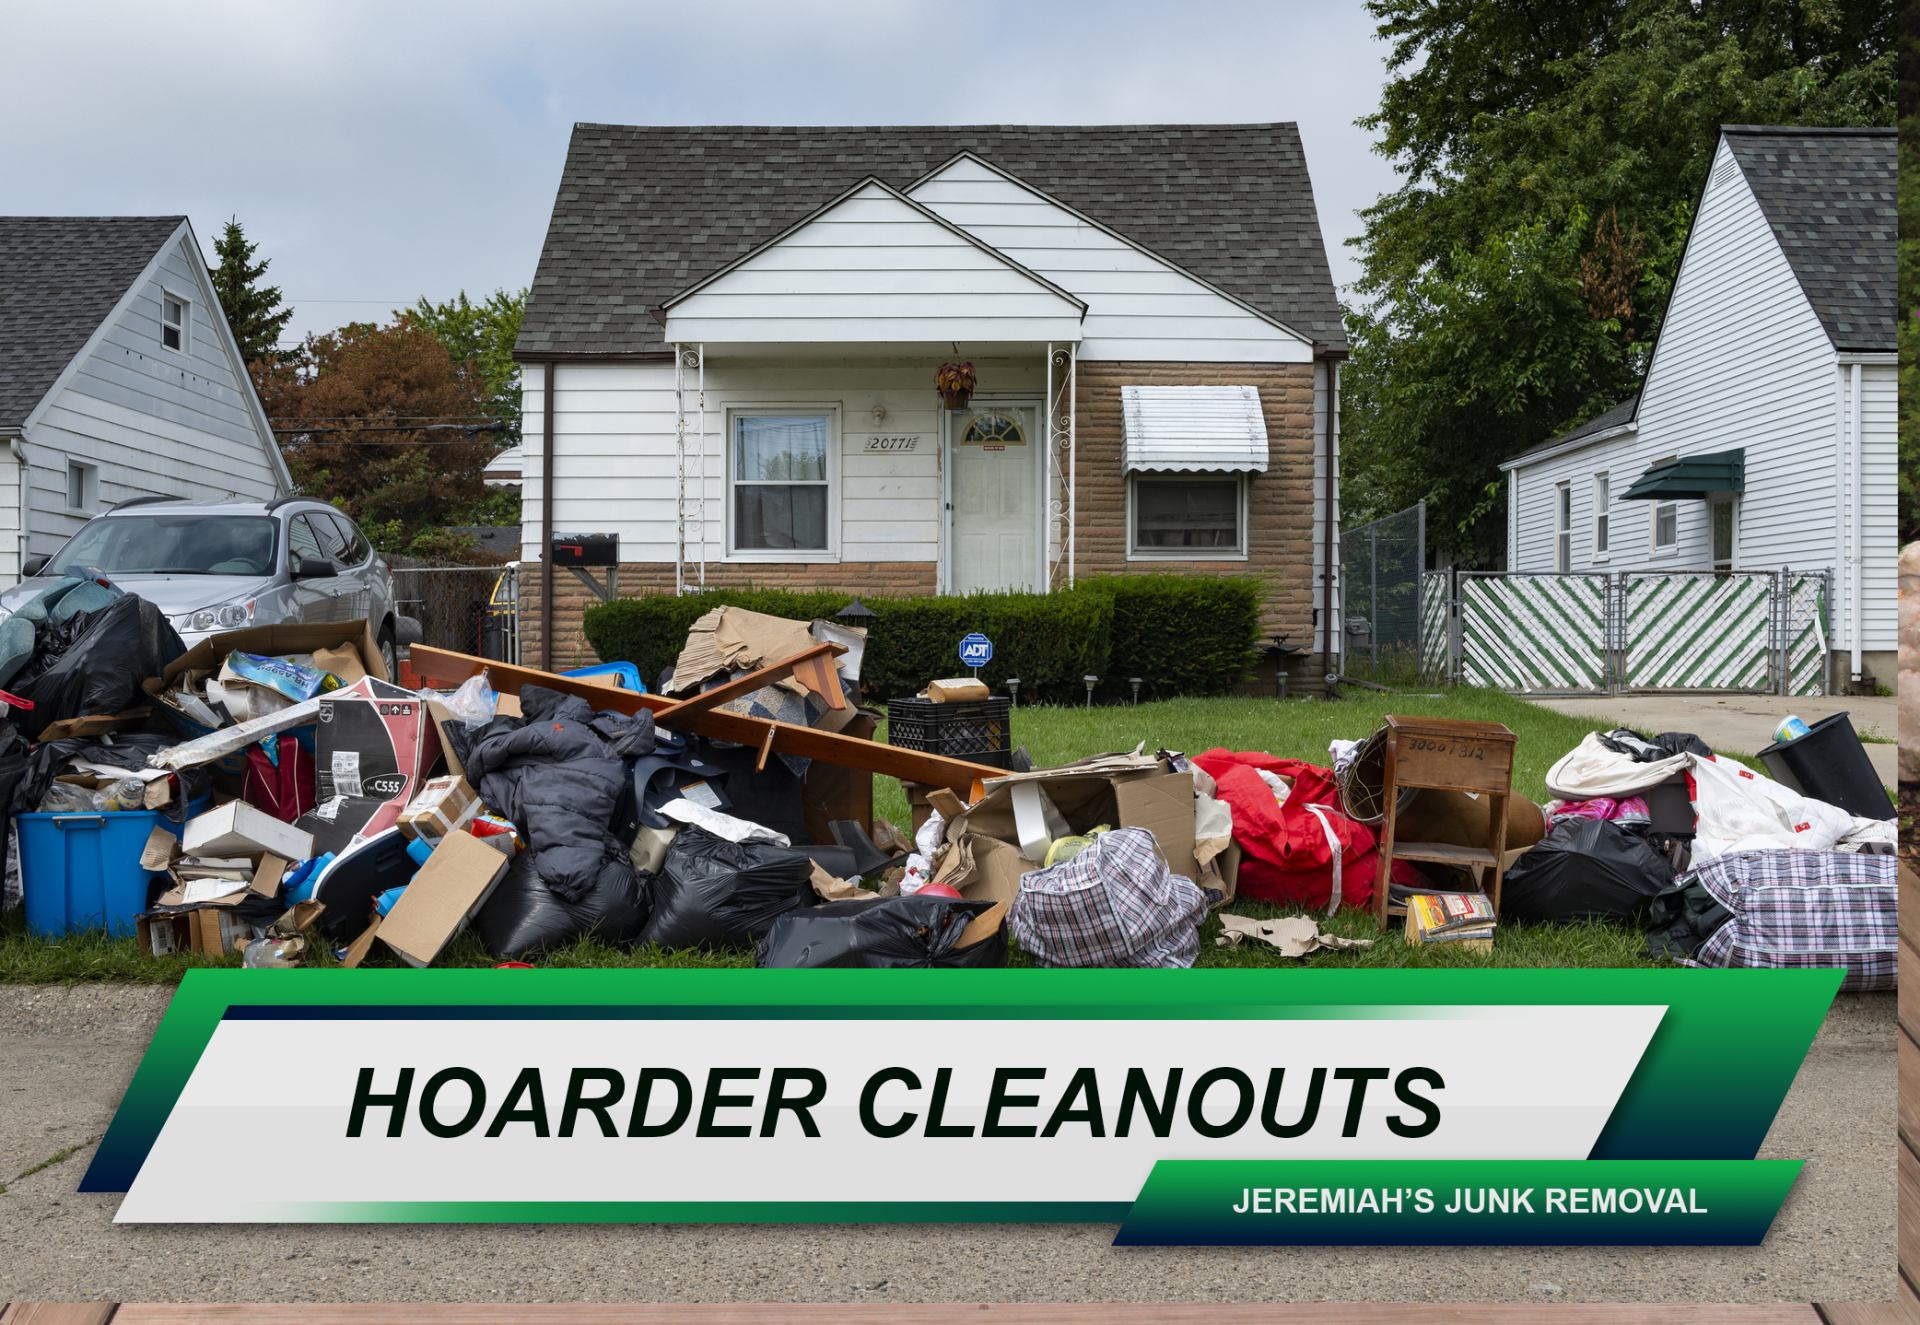 Hoarder cleanouts Jamaica